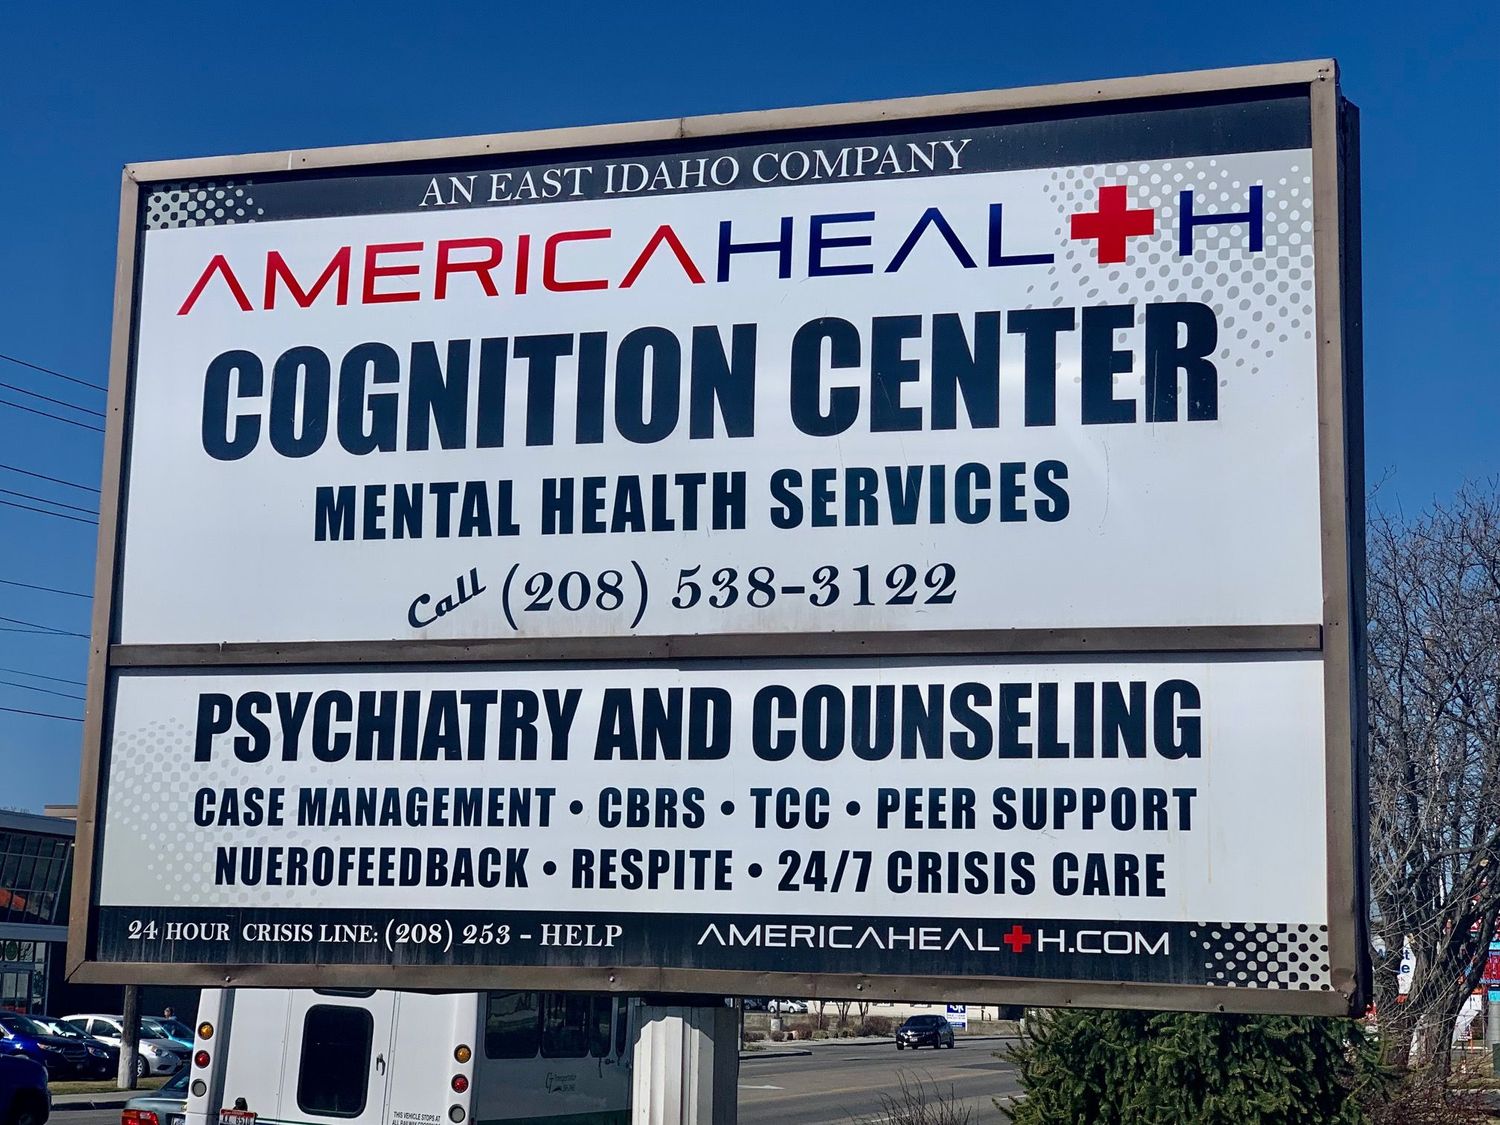 Gallery Photo of Cognition Center Sign